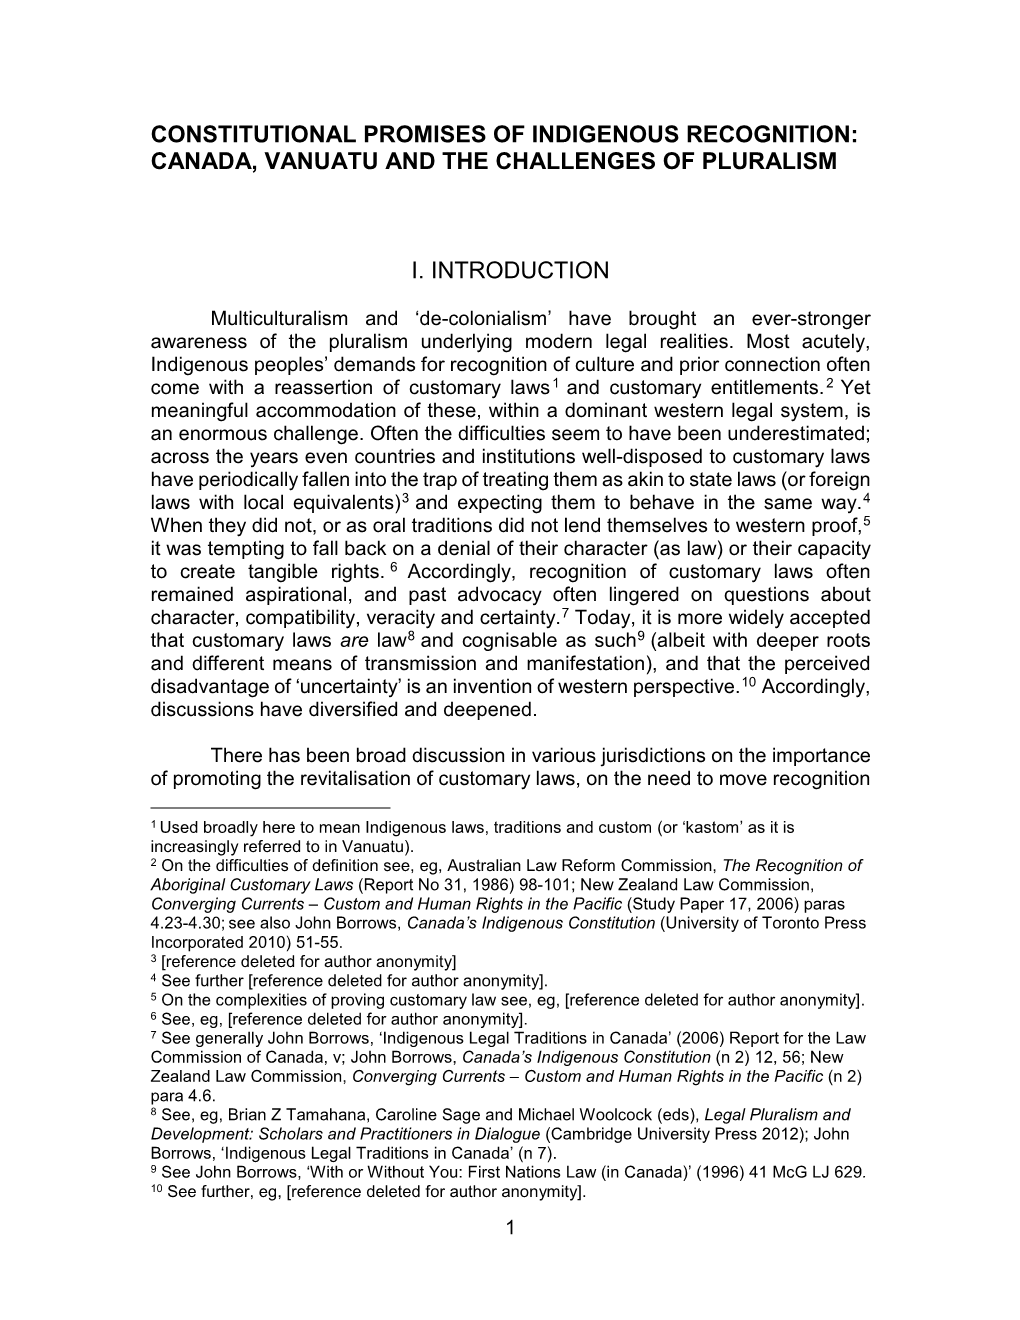 Constitutional Promises of Indigenous Recognition: Canada, Vanuatu and the Challenges of Pluralism I. Introduction